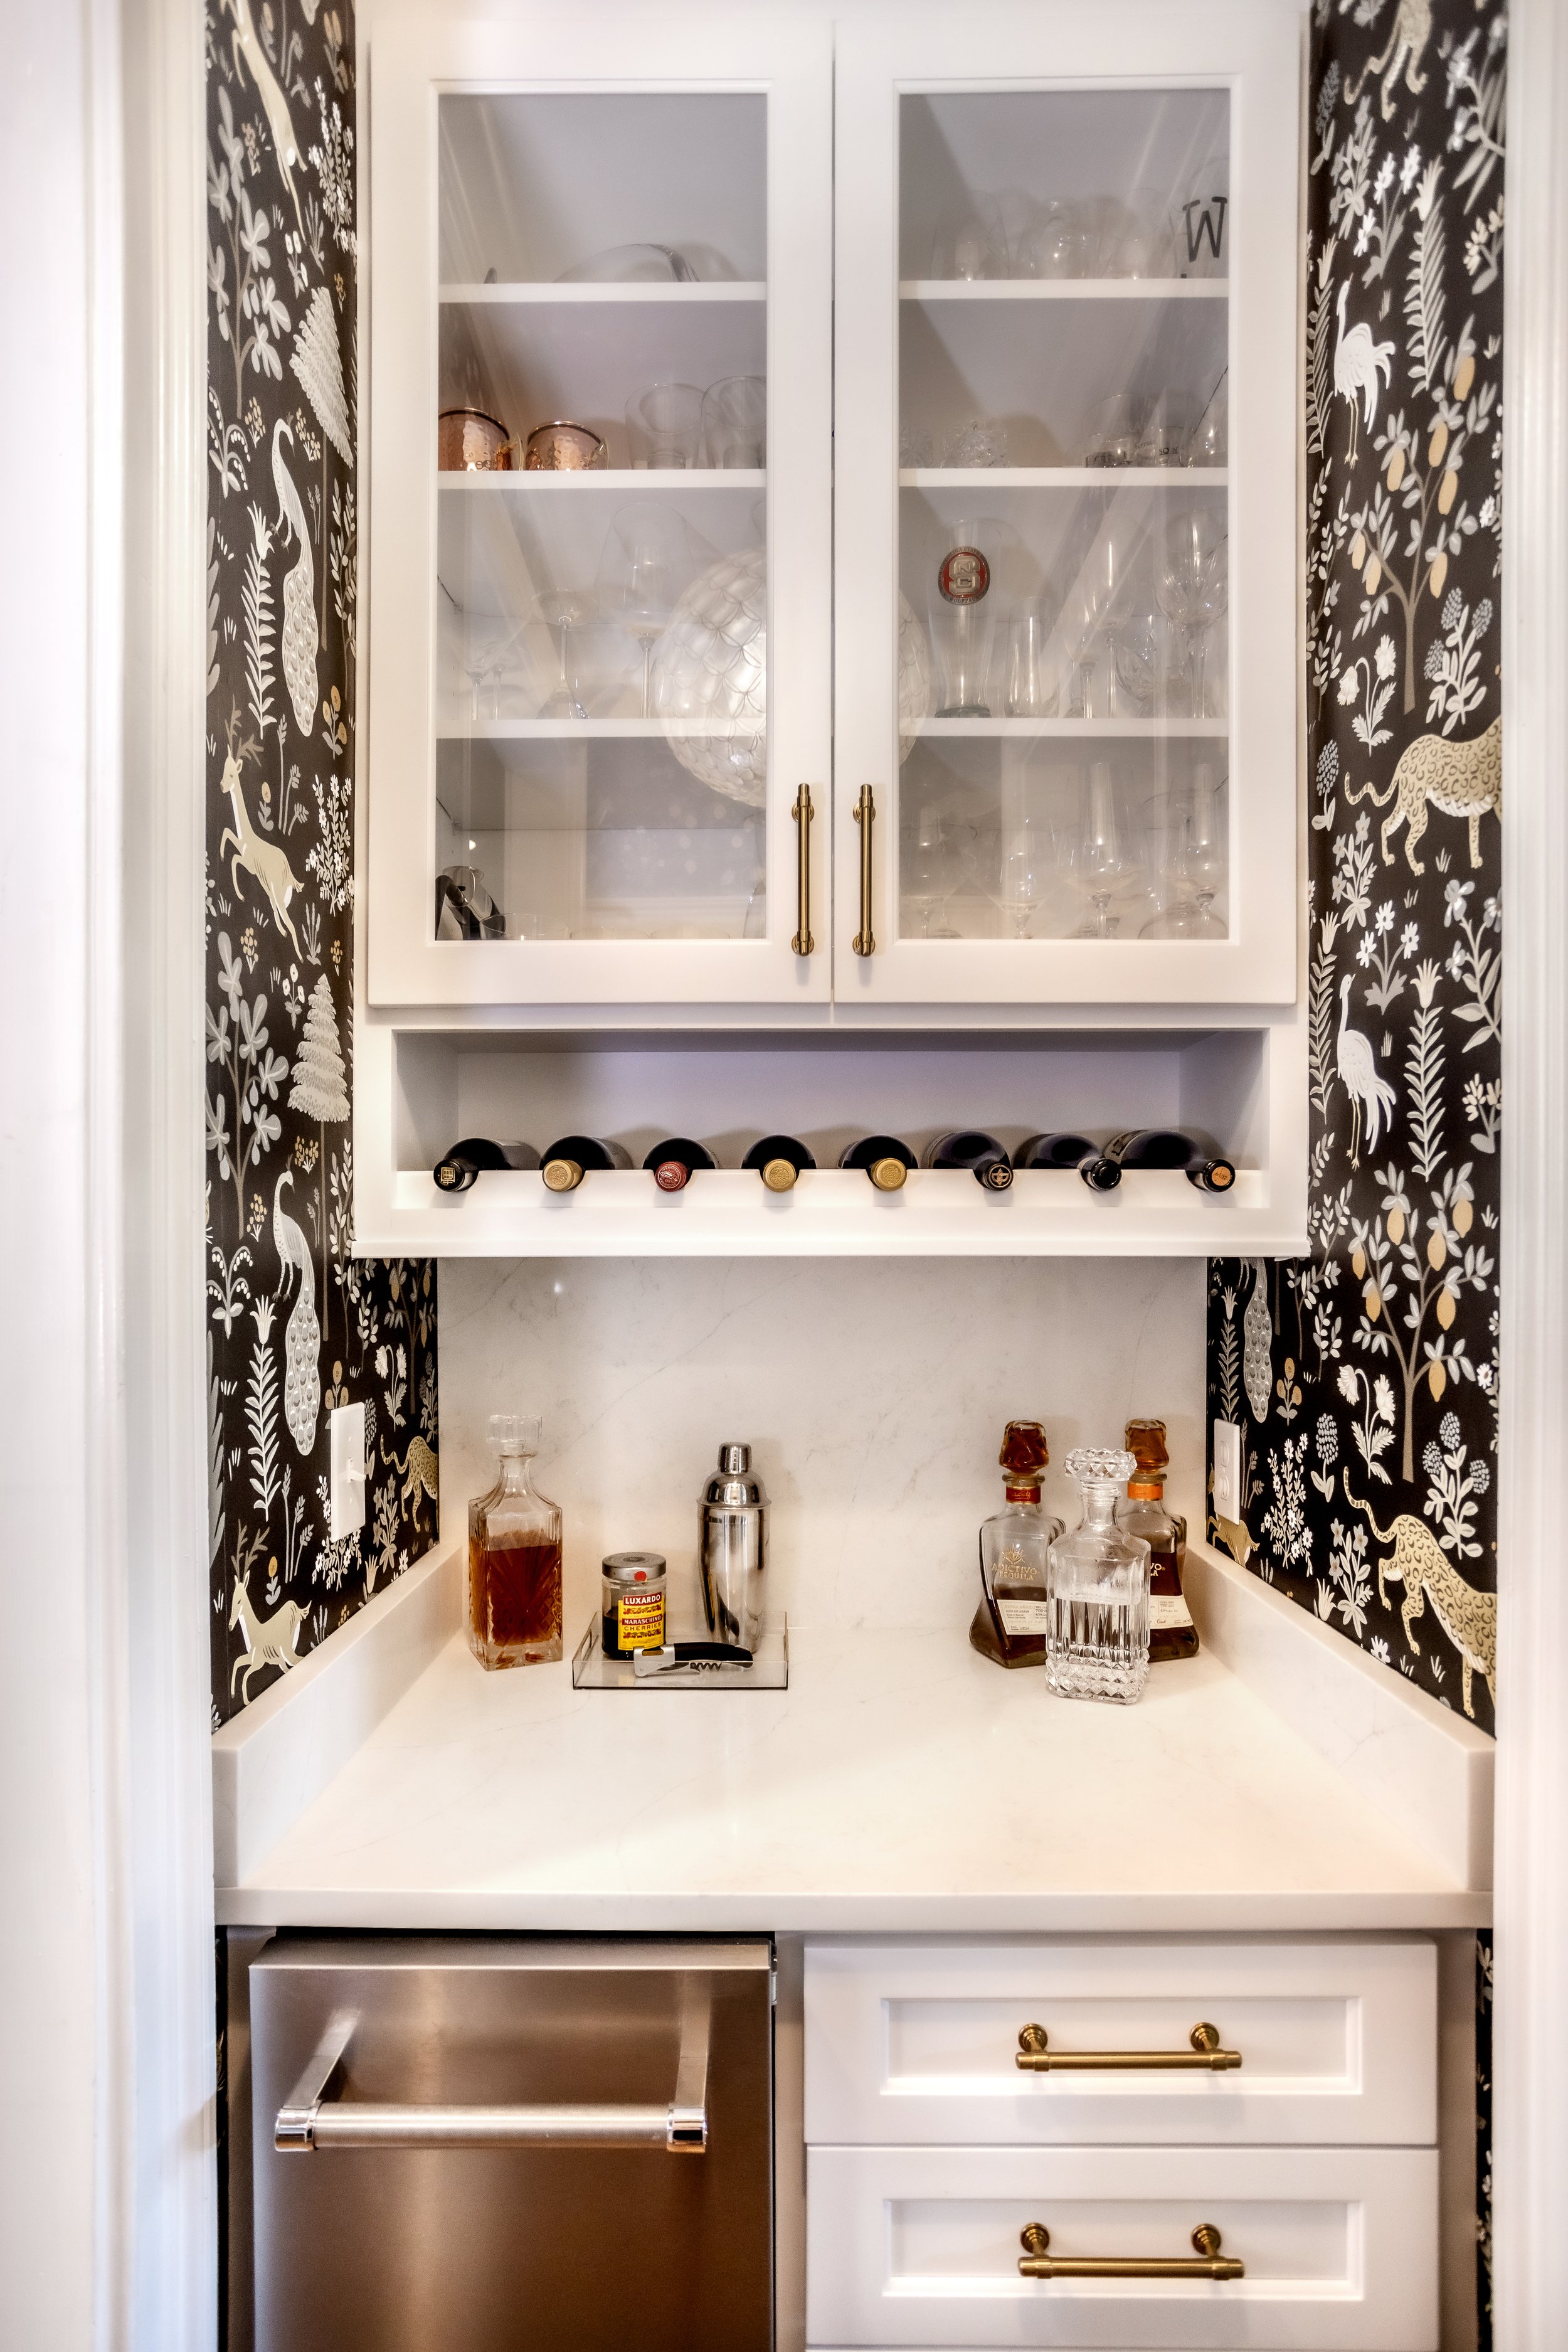 Pantry Cabinet Sitting on Countertop - Transitional - Kitchen